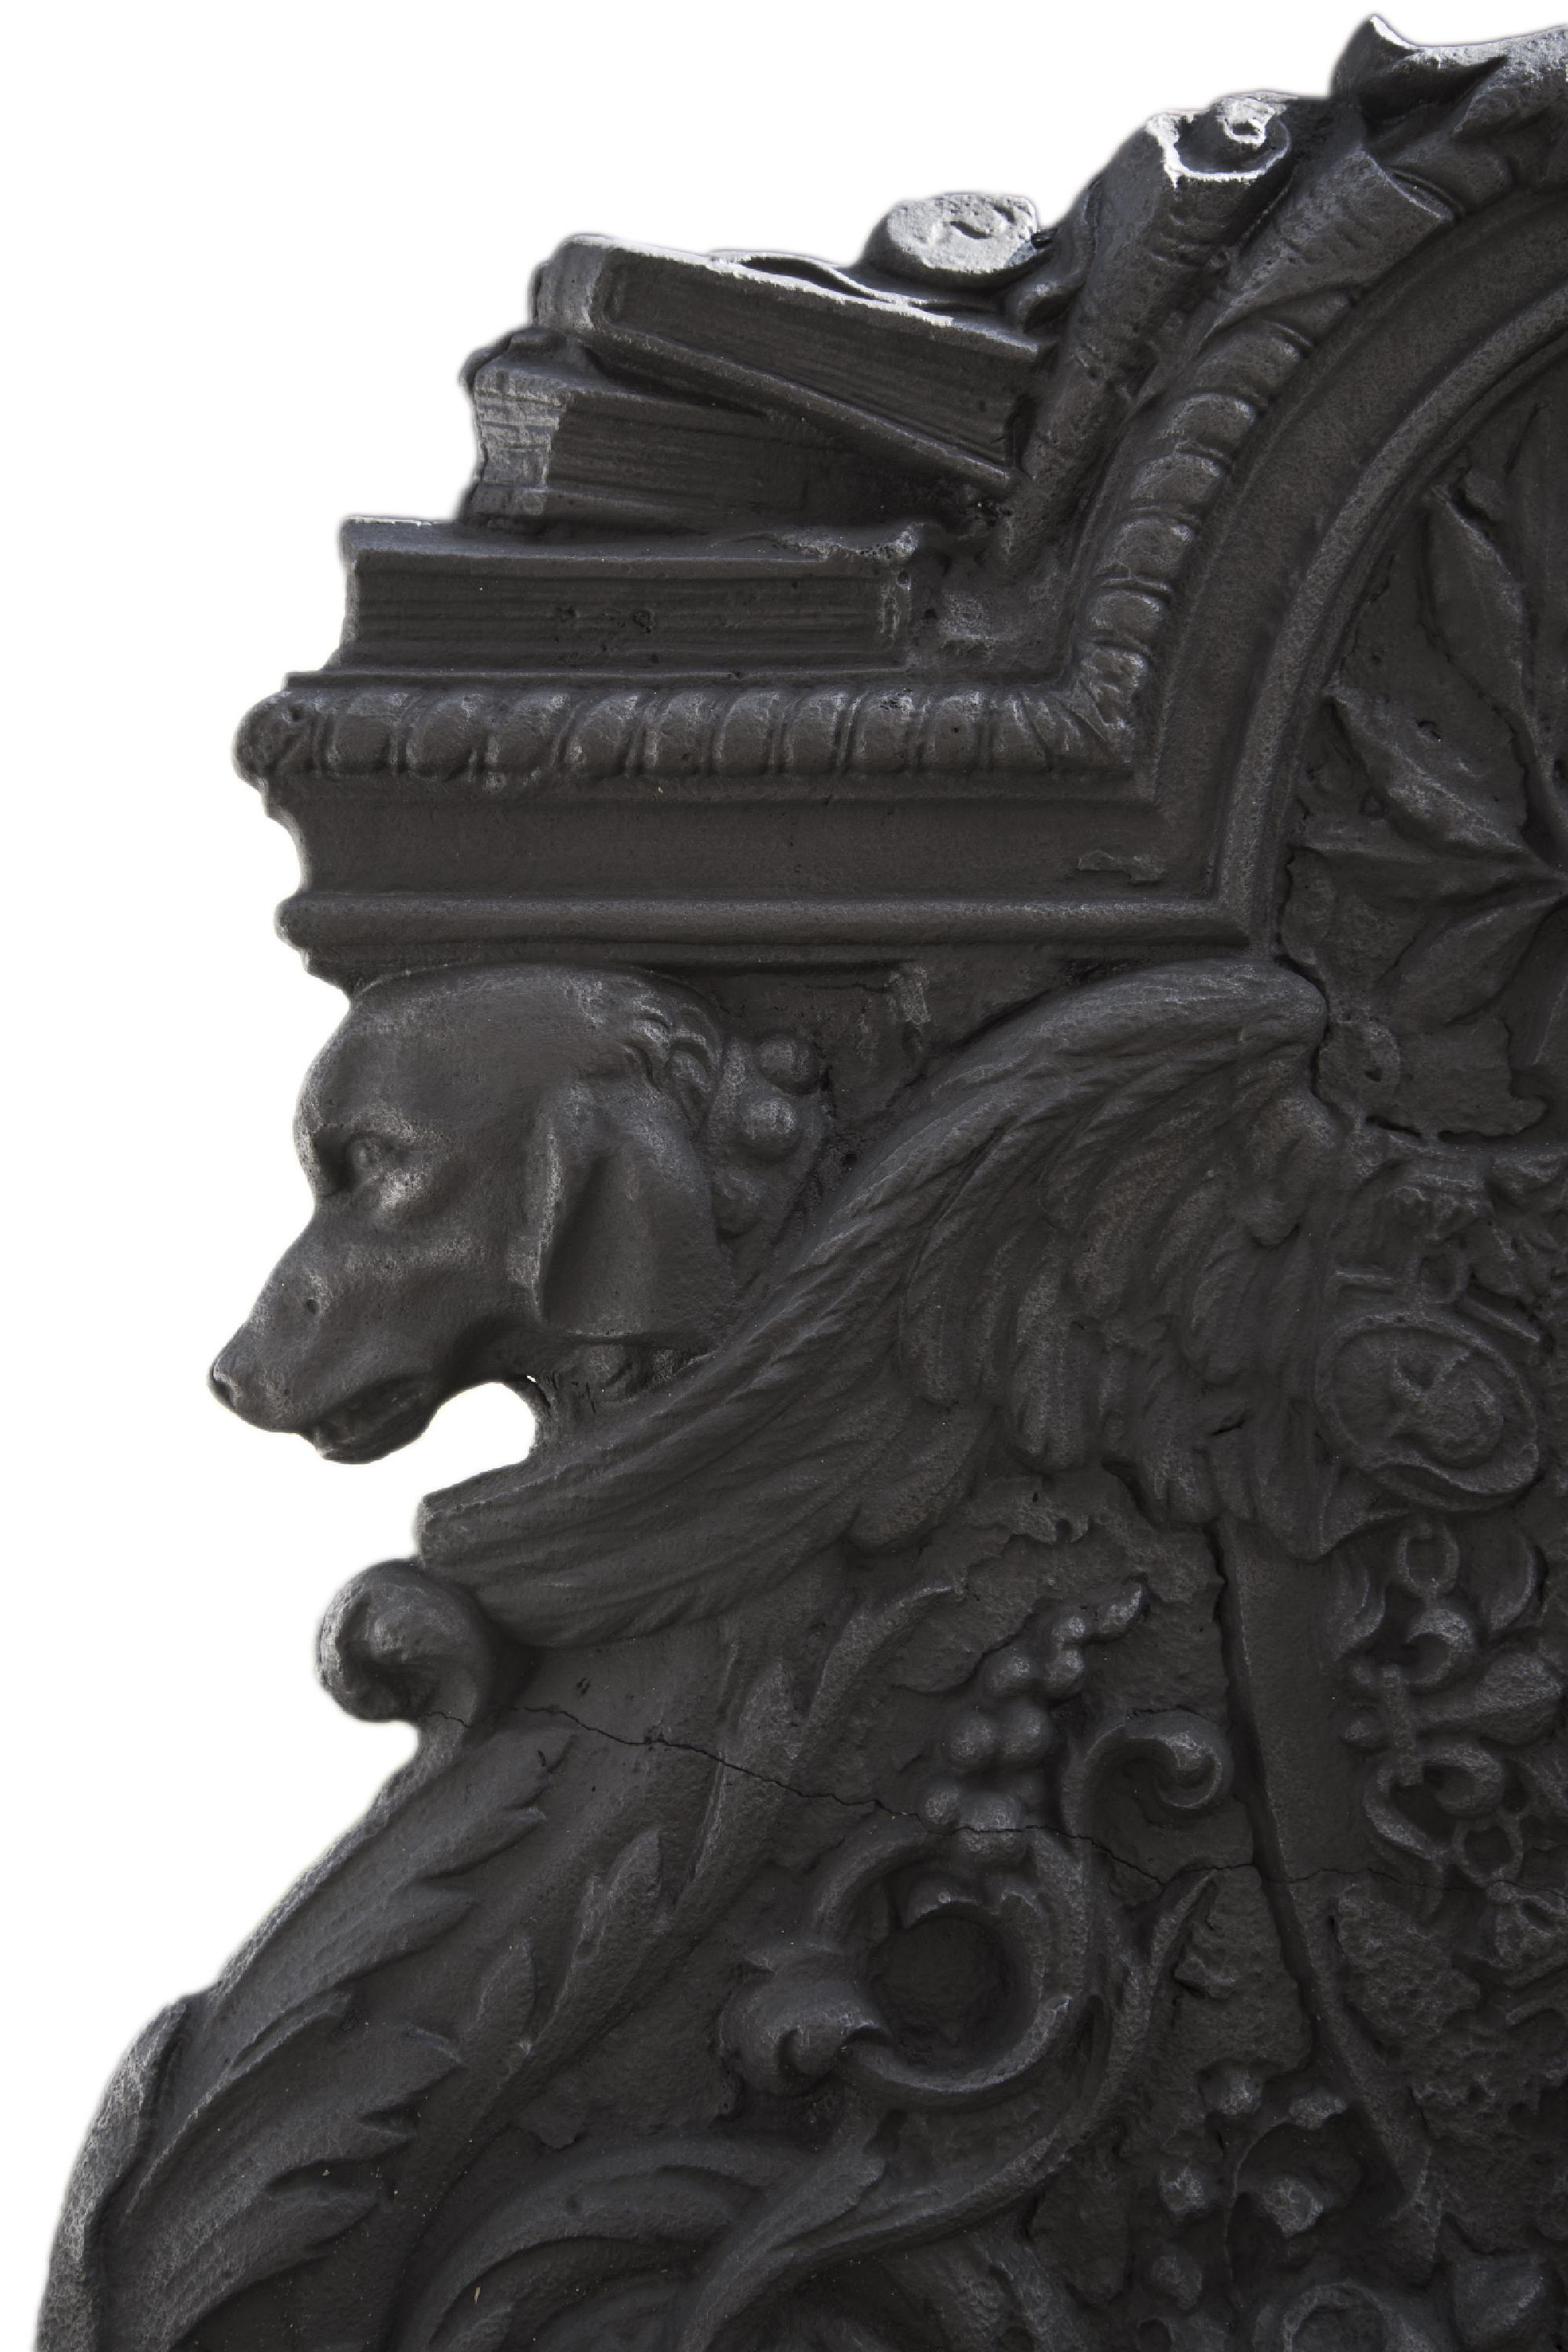 Cast iron fireback with the coat of arms of Colbert, marquis de Seignelay 1